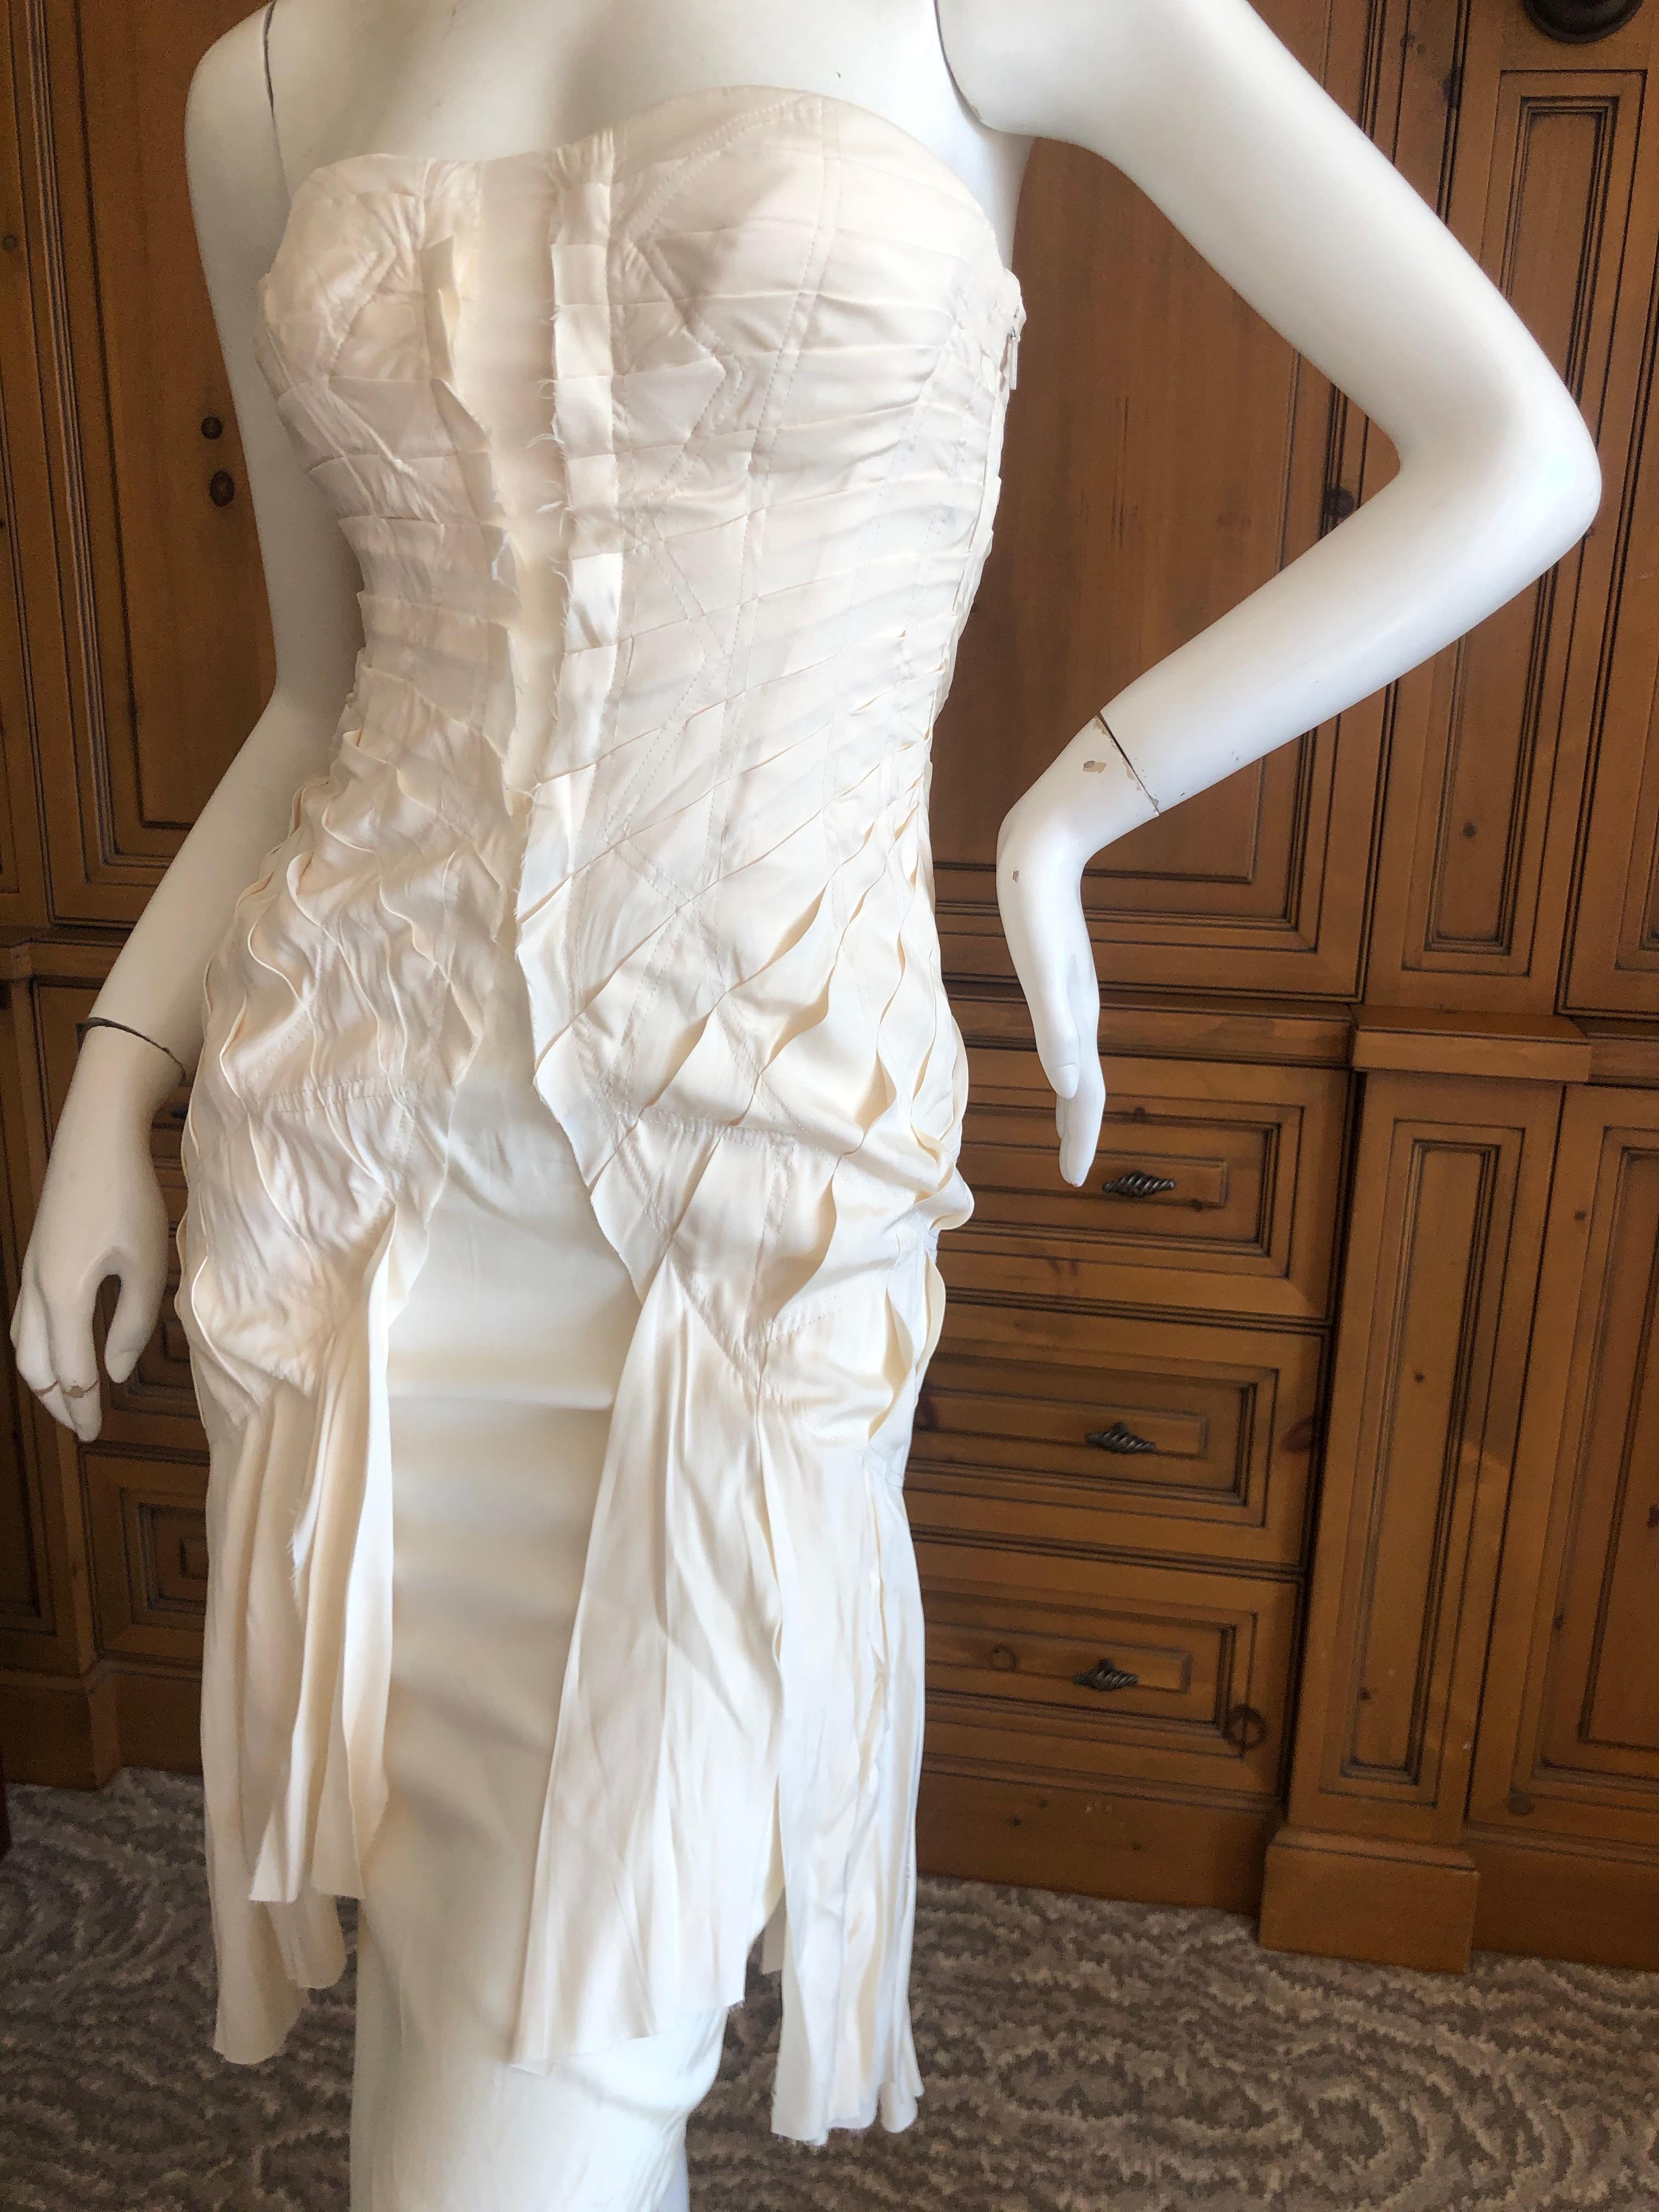 Gucci Tom Ford 2003 Ivory Ribbon Dress.
Ivory Silk , please use the zoom feature to see the details, so pretty.
Size 40
Bust 32